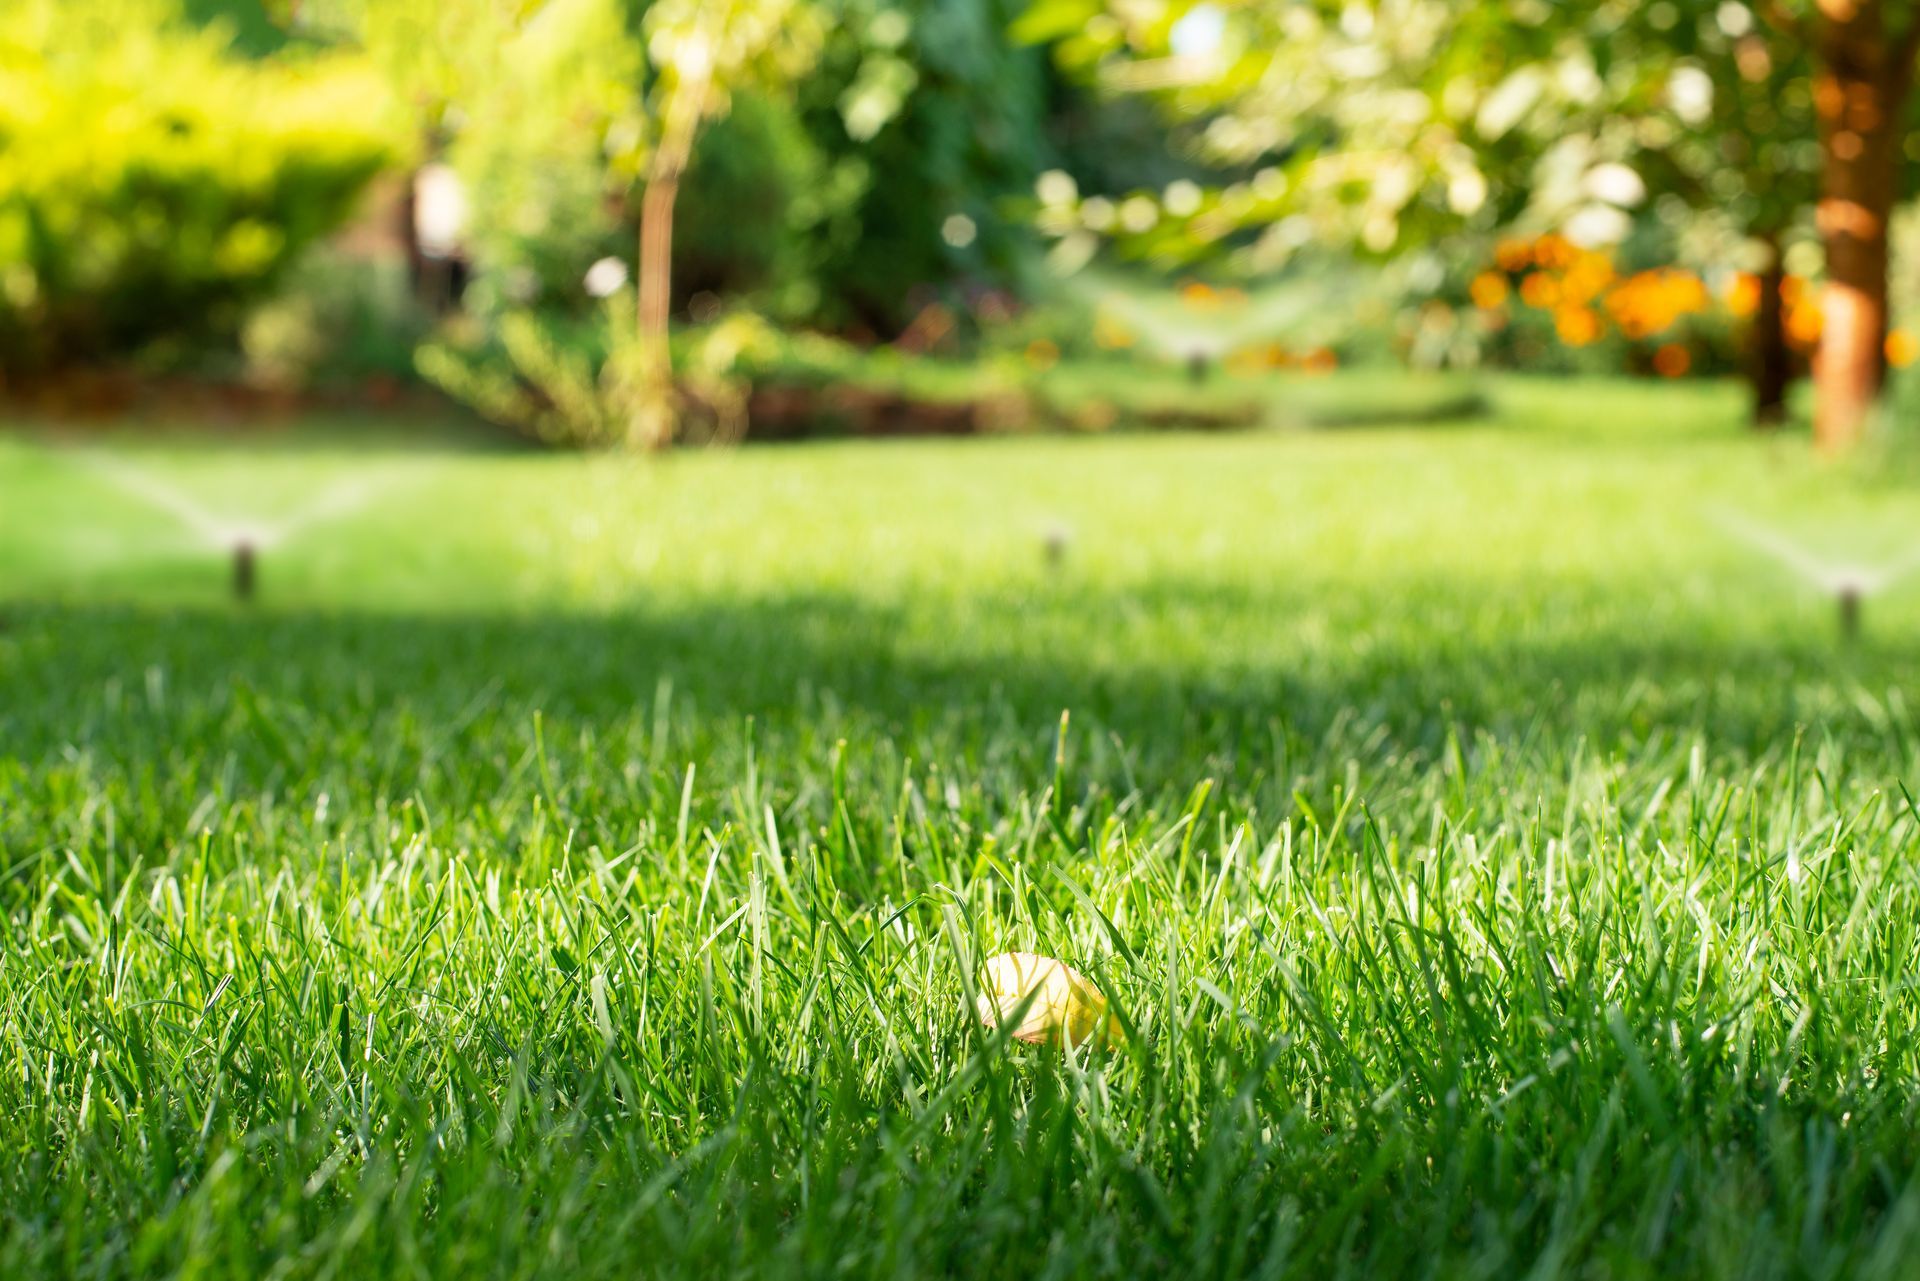 Boulder Creek Lawn & Landscape Always Provides Exceptional Lawn Care to Mid-MO Homeowners!